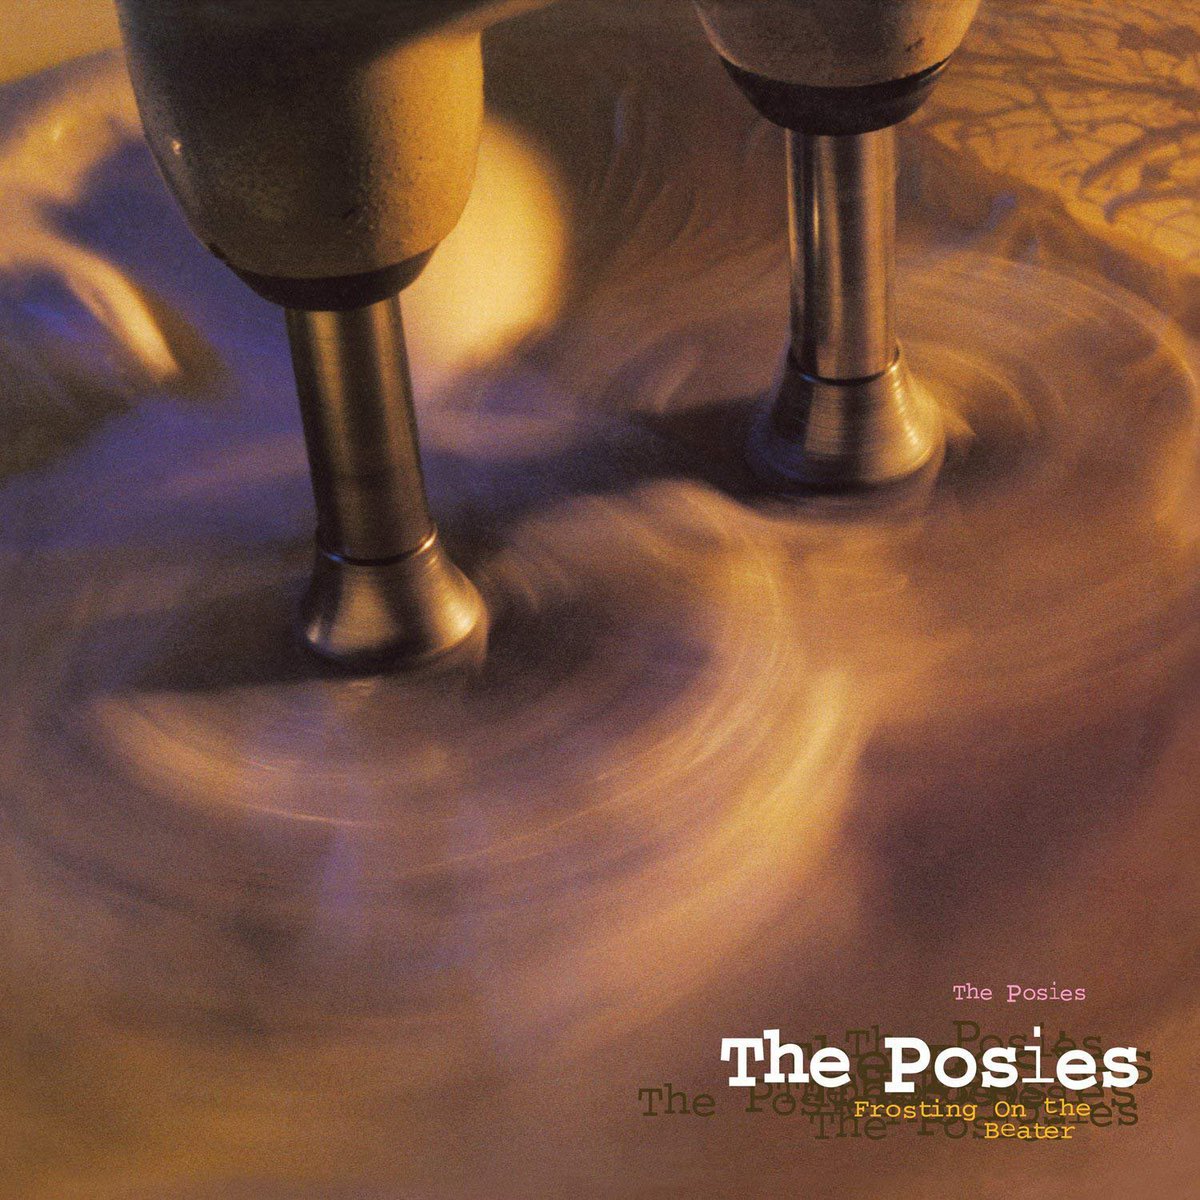 #46 - The Posies - Frosting On The Beater The Posies hated being lumped with grunge, going so far as to lampoon it on ‘Flavour Of The Month’, but as I said at the start, if you have a distortion pedal and you’re from the PNW, then you’re fair game. #Top50GrungeAlbums